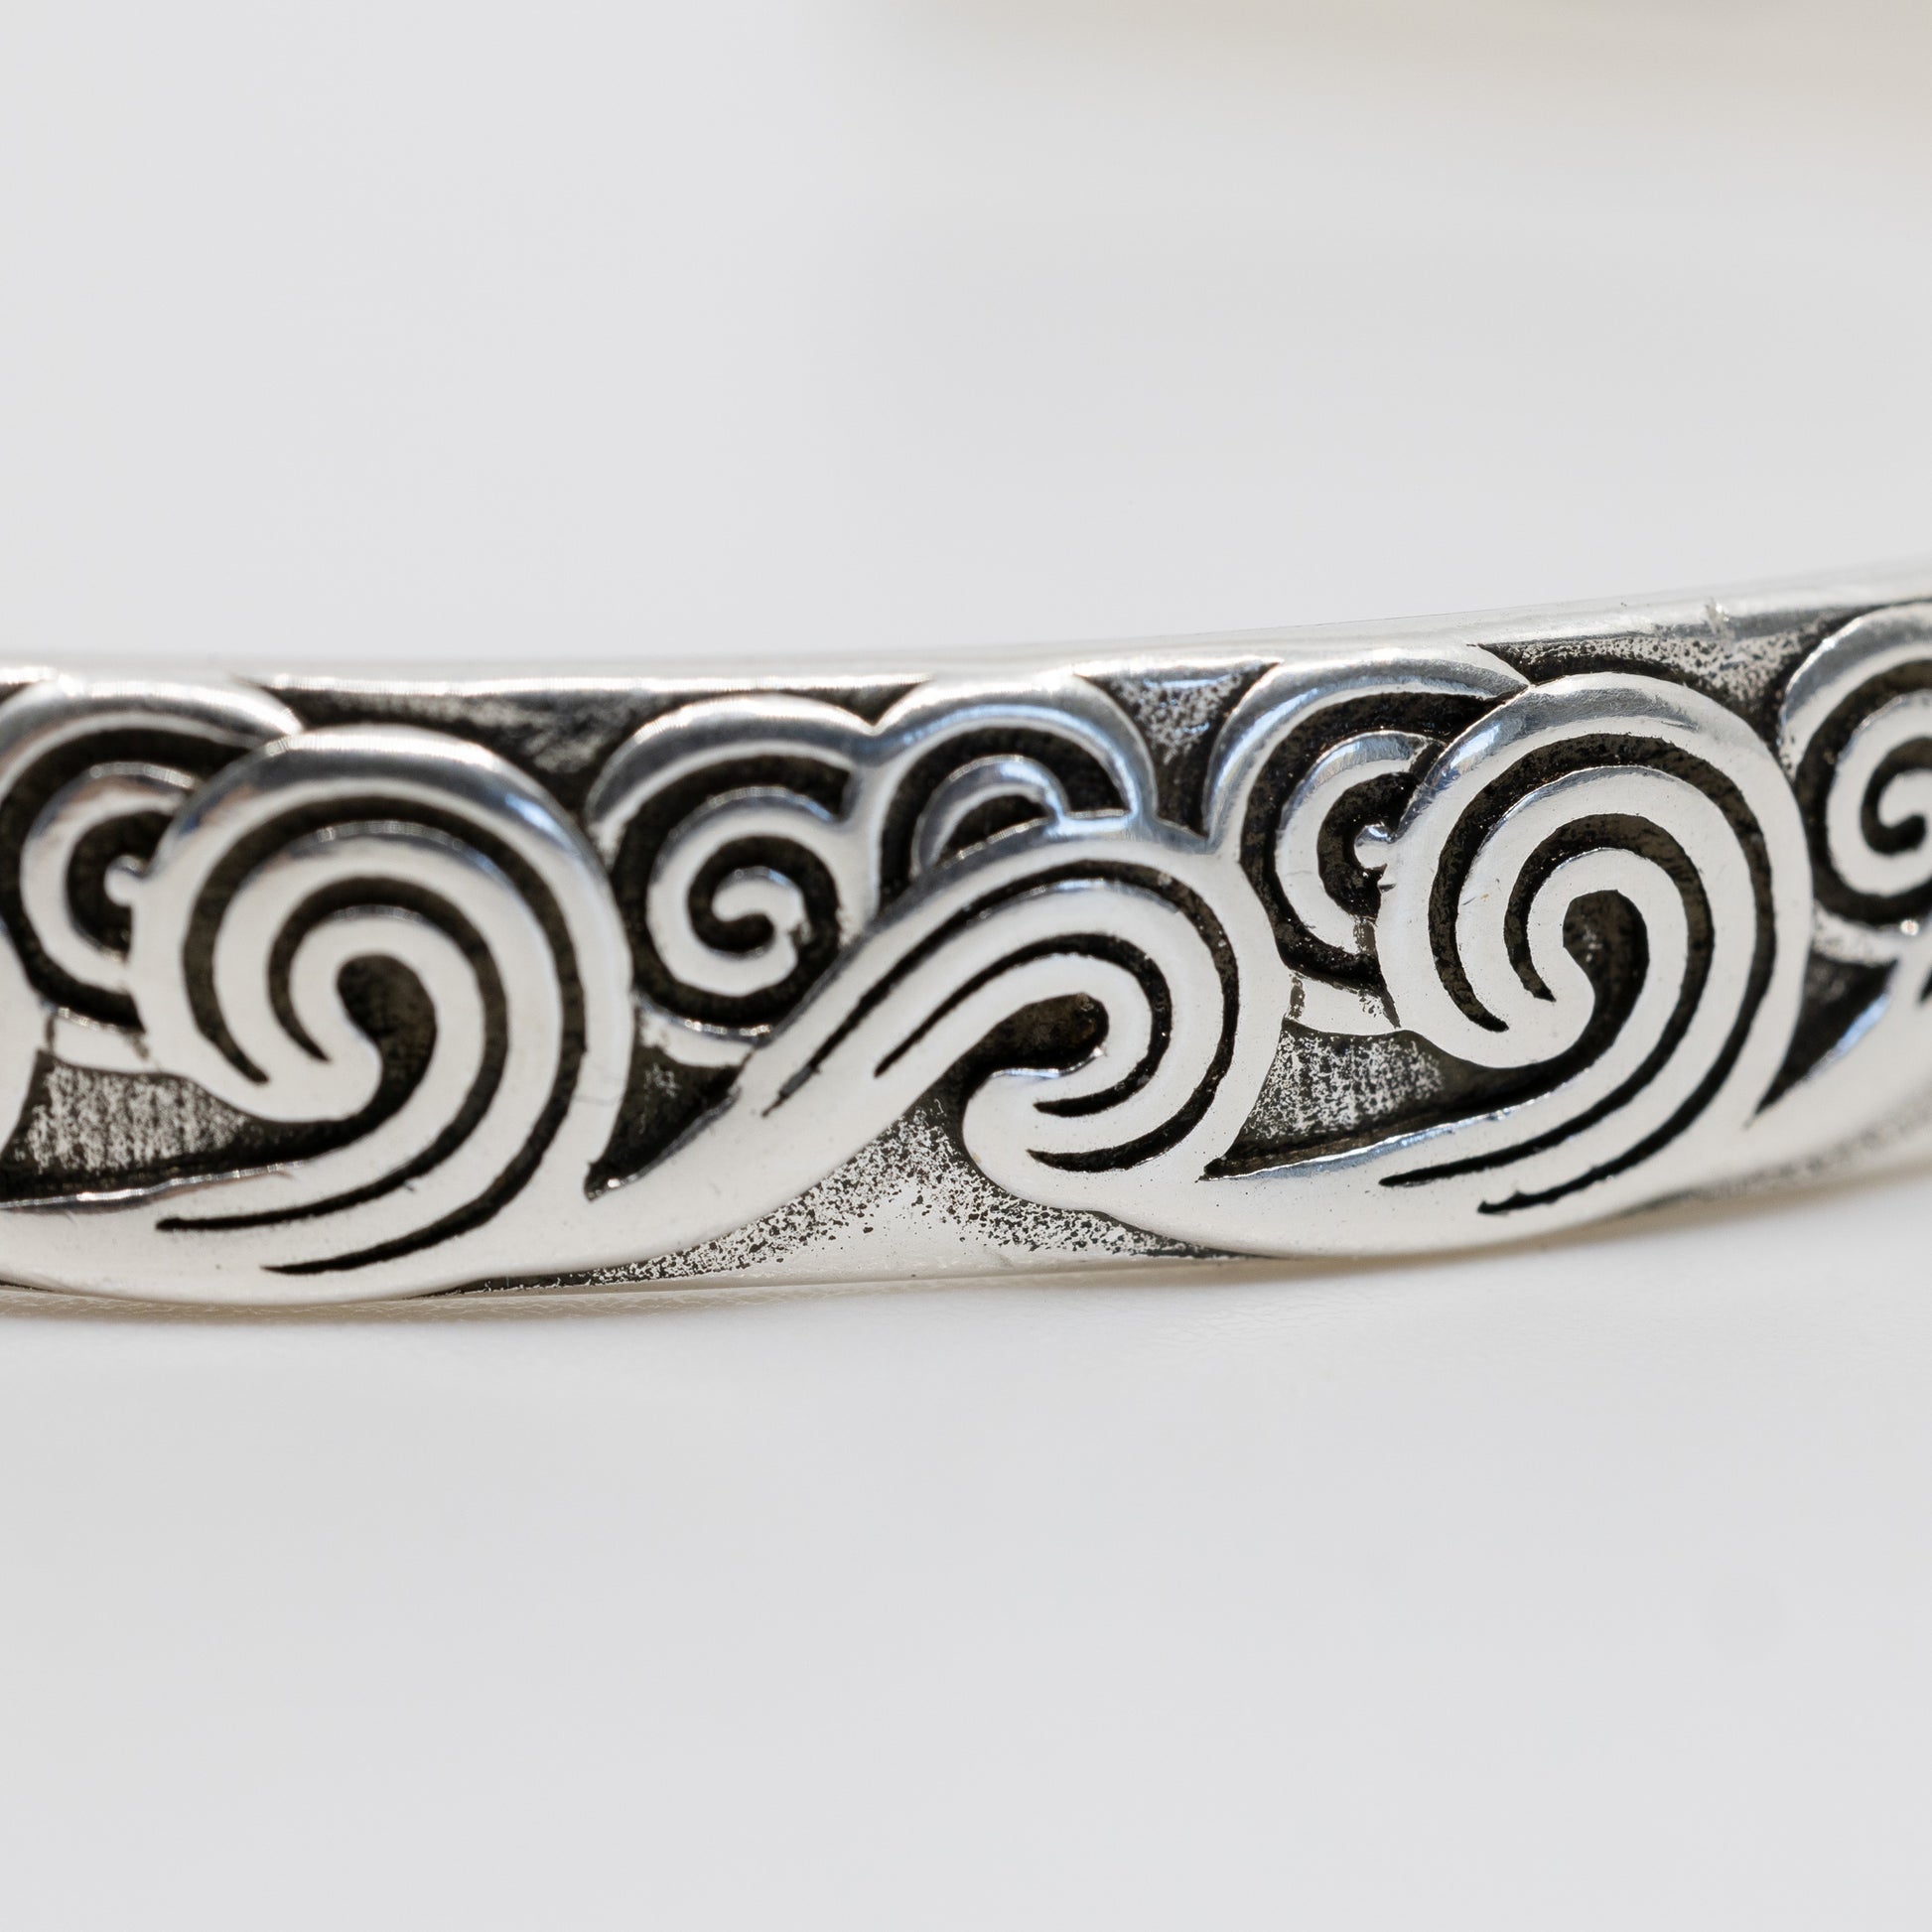 Sterling Silver Wave Bangle for Partner, Girlfirend Or Wife - To My Surf Babe